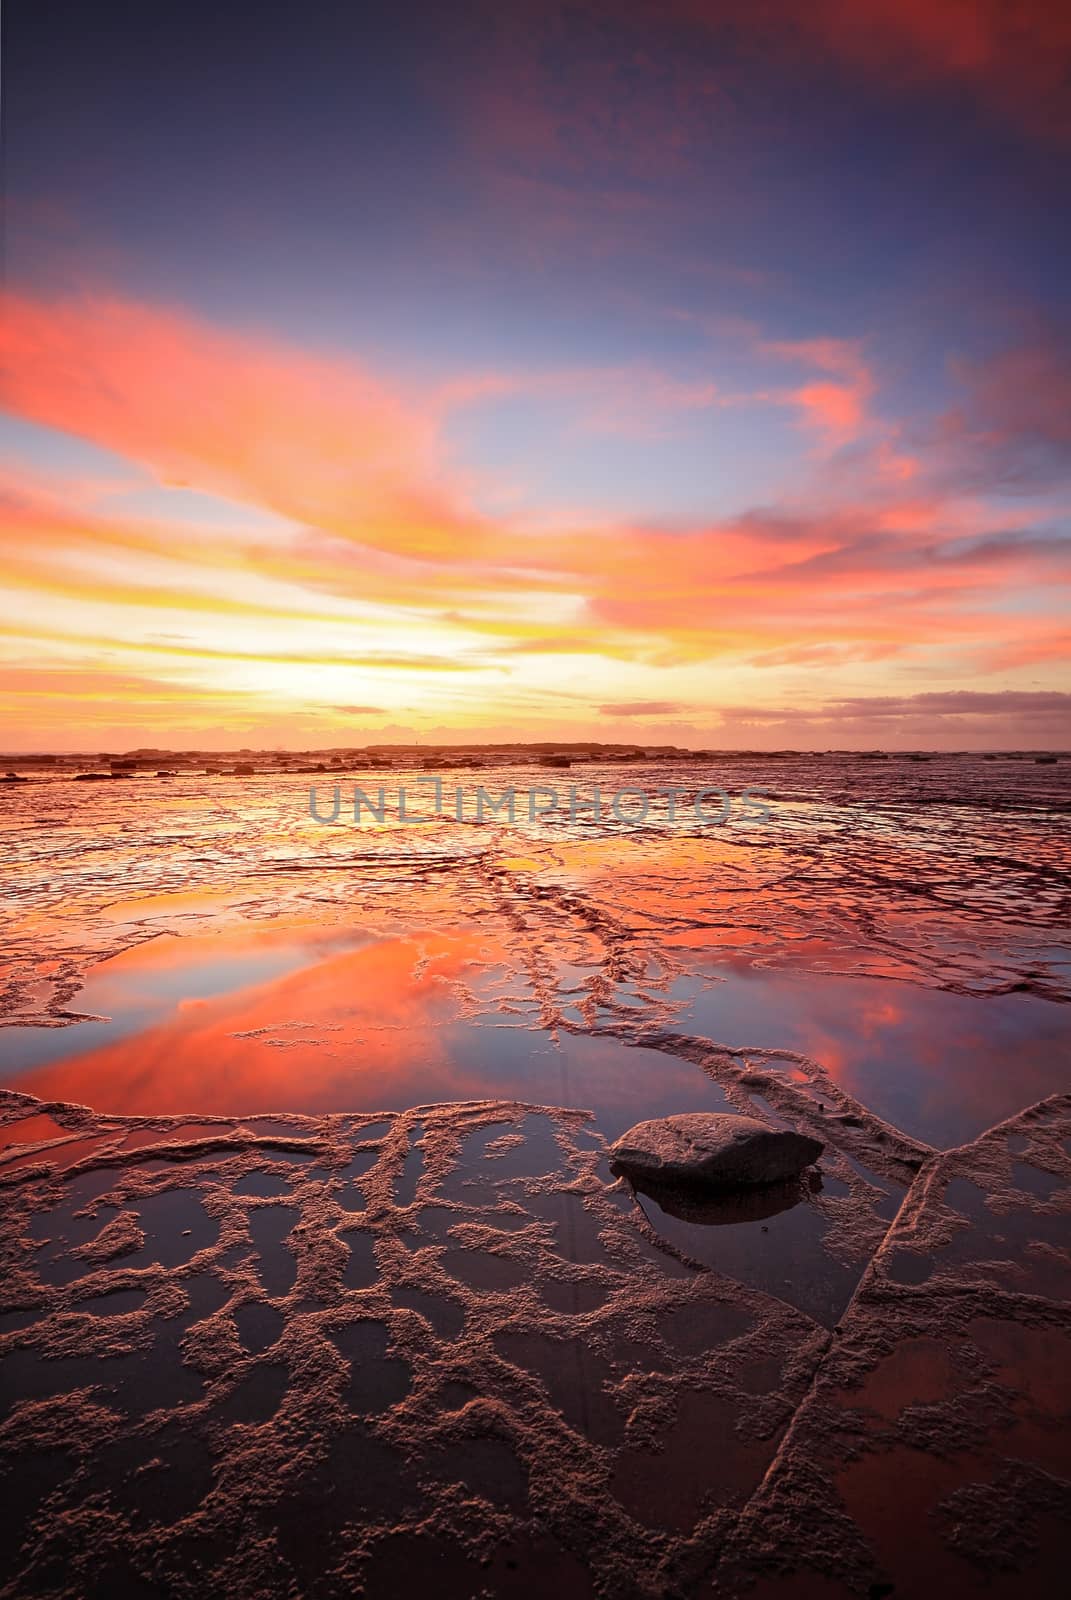 Vertical views across the vast rockshelf of Long Reef at low tide during a vivid sunrise with reflections of the sky in the wet rocks exposed. Lone fisherman at horizon gives dimension to space. Orientation suitable for magazine or vertical brochure.